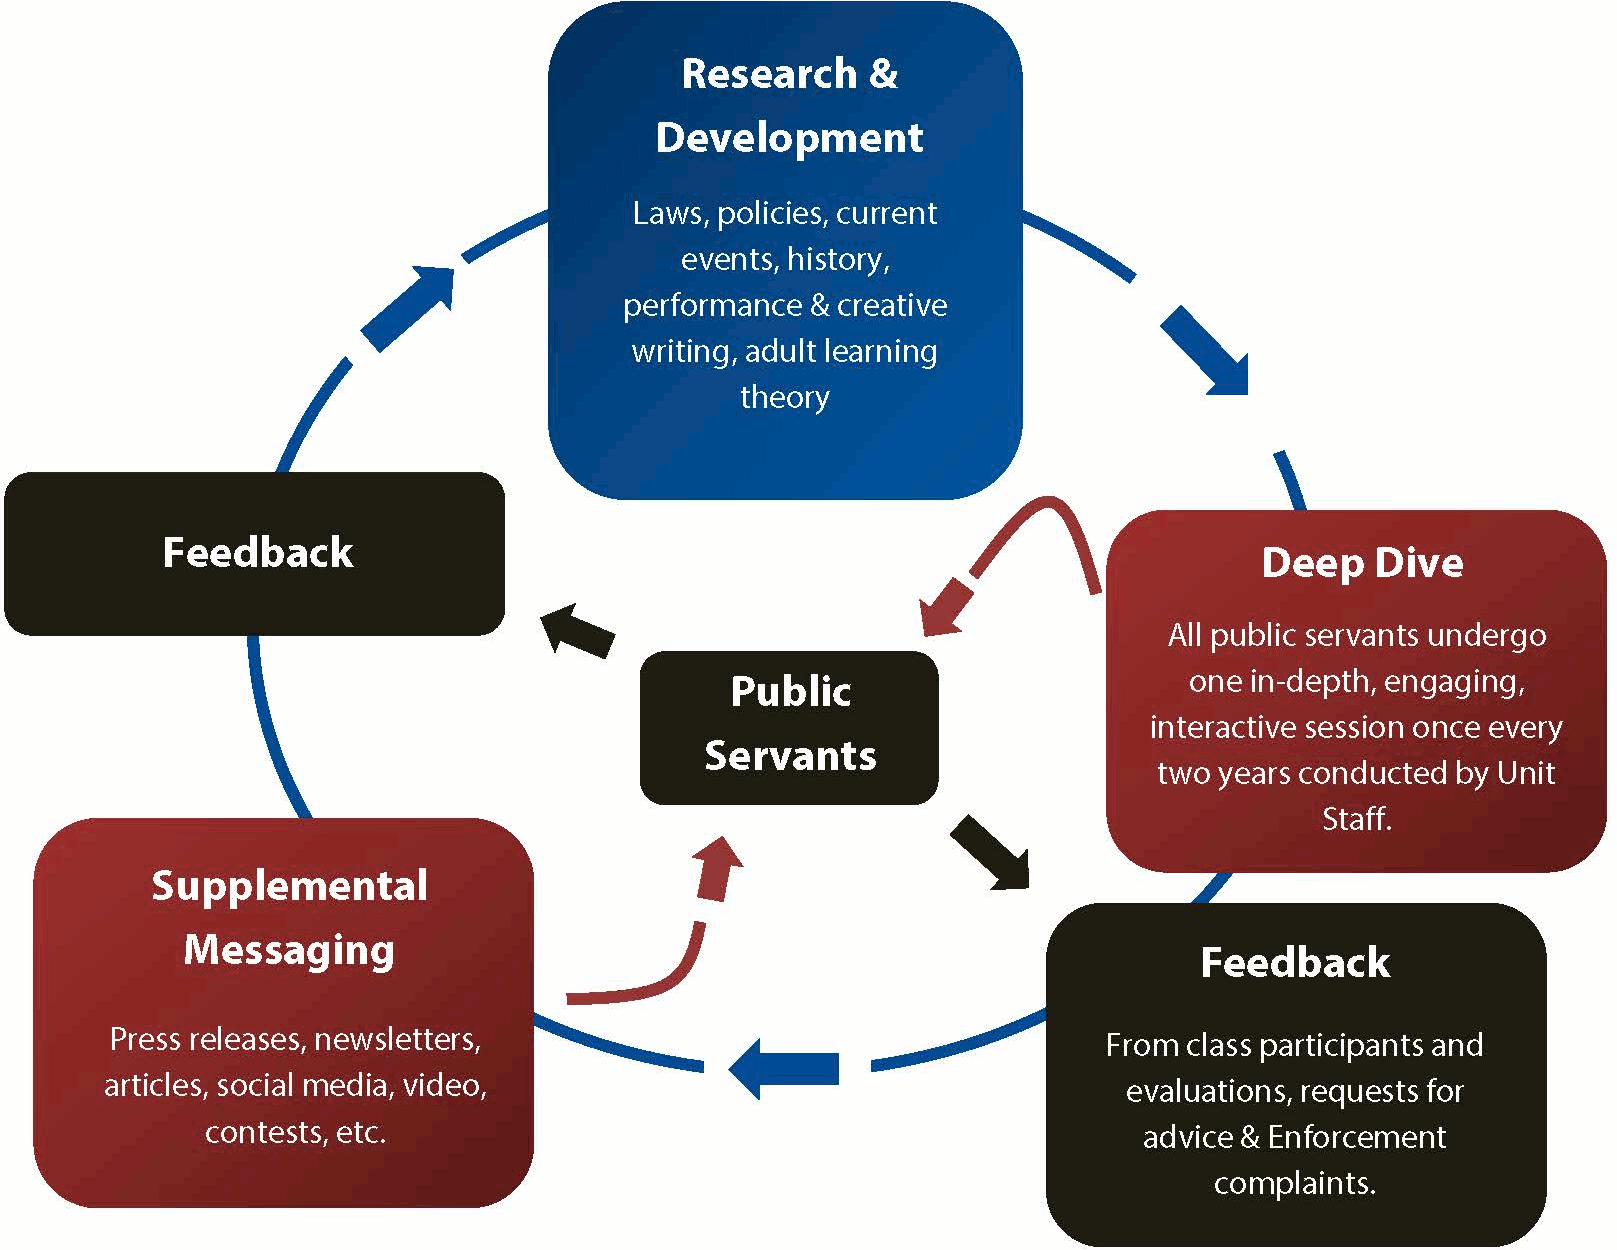 Flow chart depicting the Education & Engagement Unit's training process and philosophy